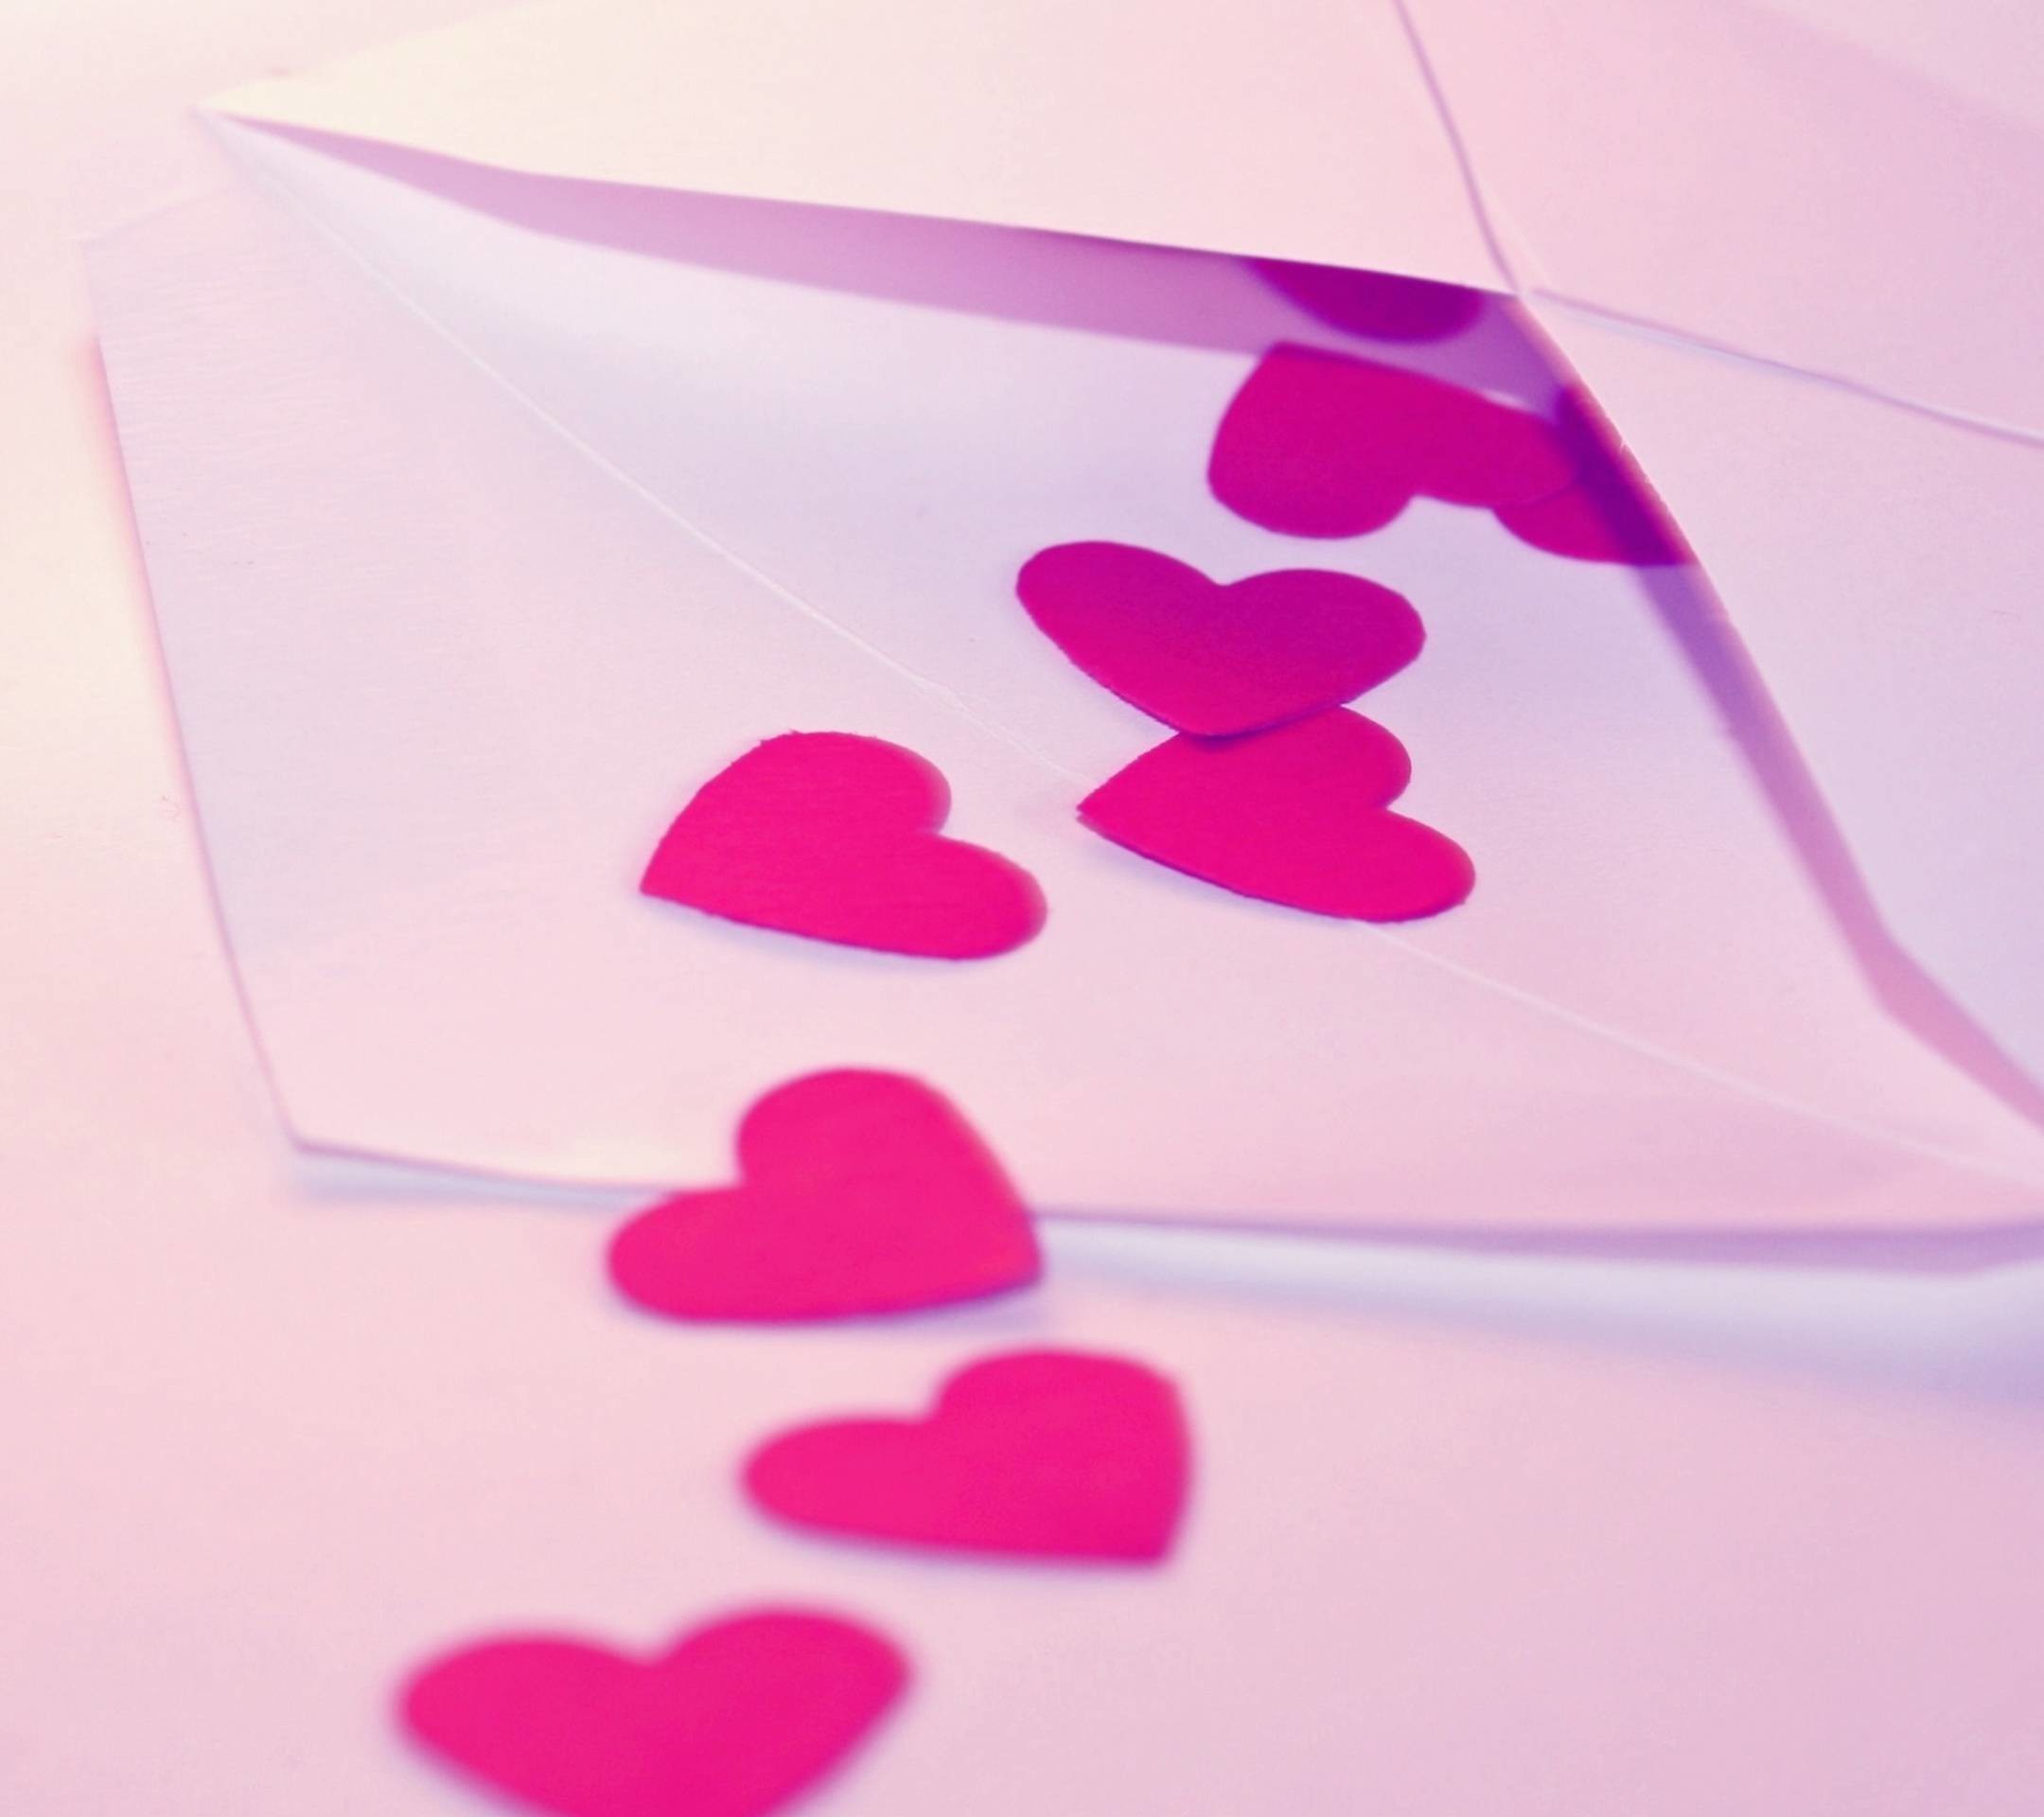 2160x1920  Pink Hearts Wallpapers, wallpaper, Pink Hearts Wallpapers hd .